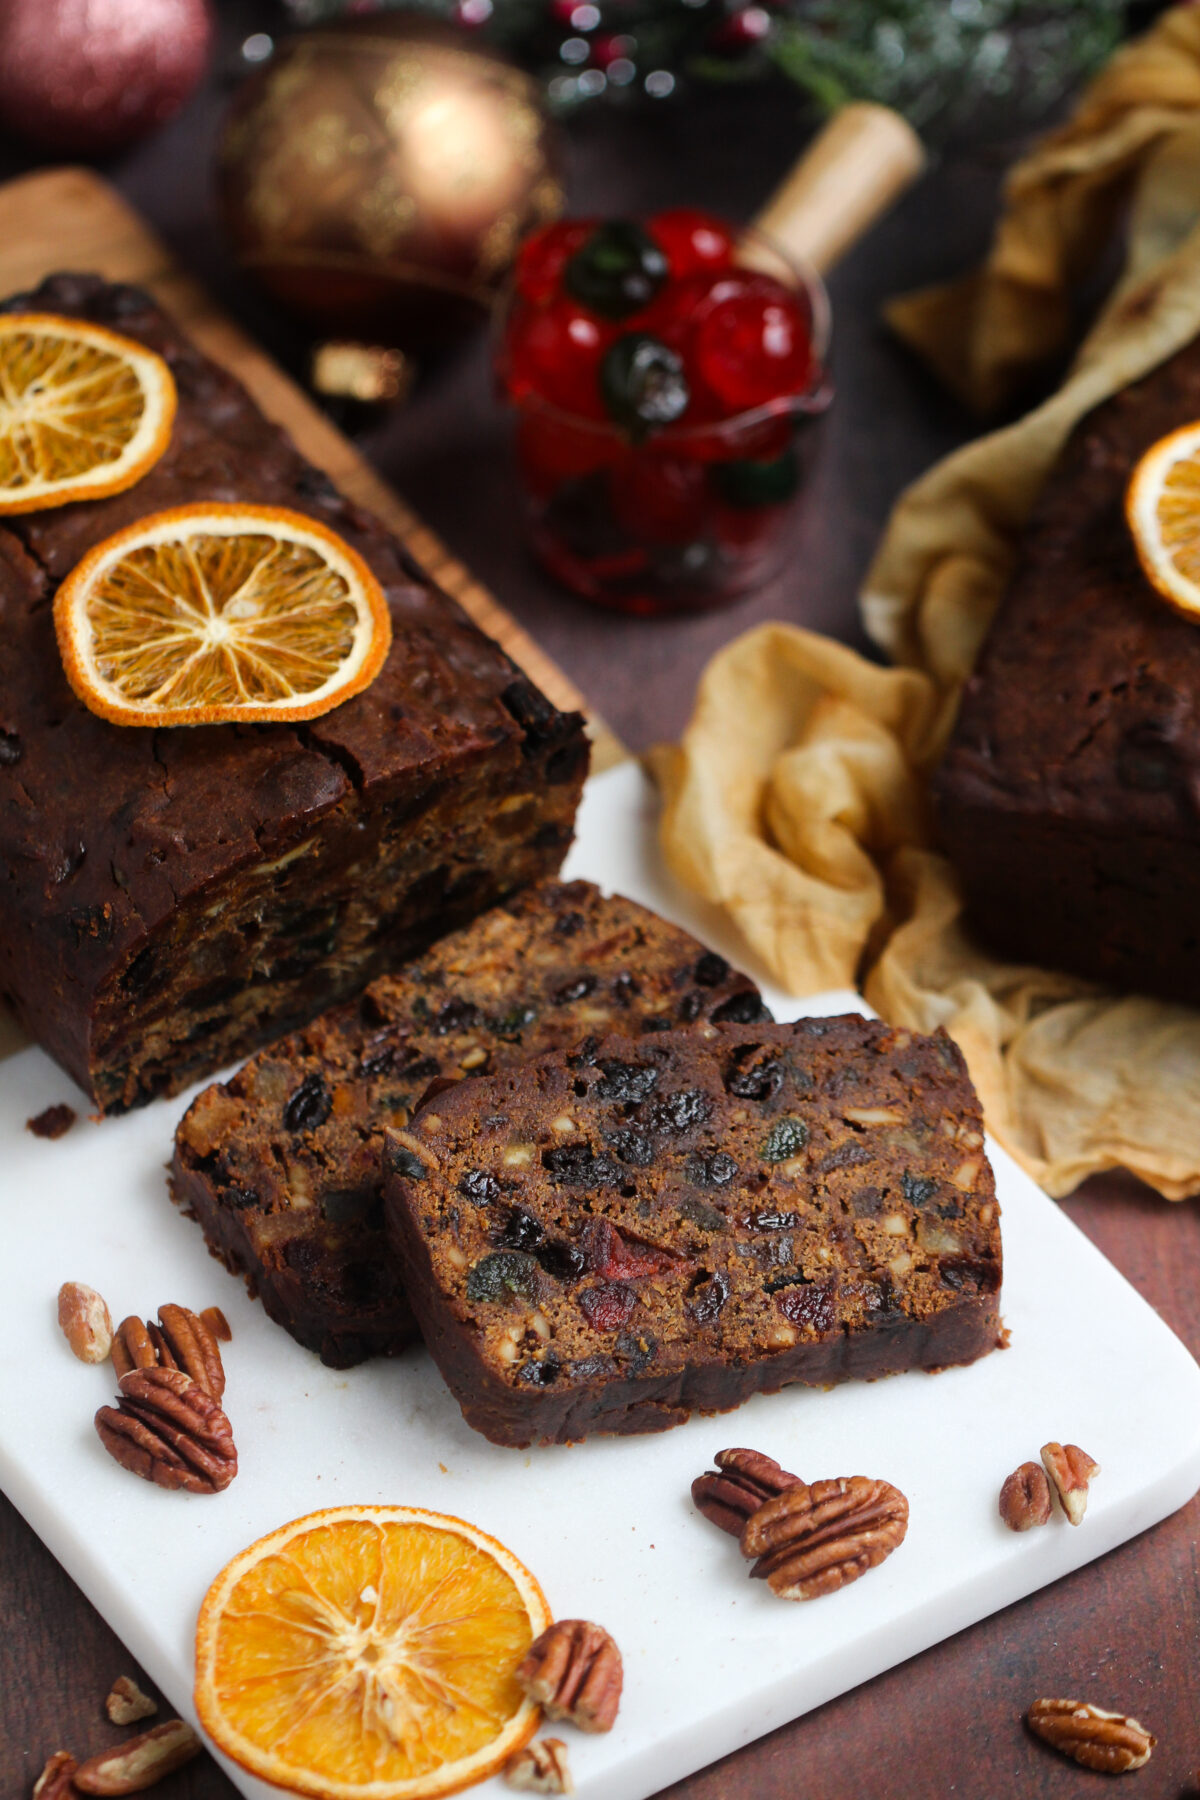 Discover the ultimate holiday fruitcake recipe! Bake up a classic fruitcake that will wow even the most discerning fruitcake enthusiast.